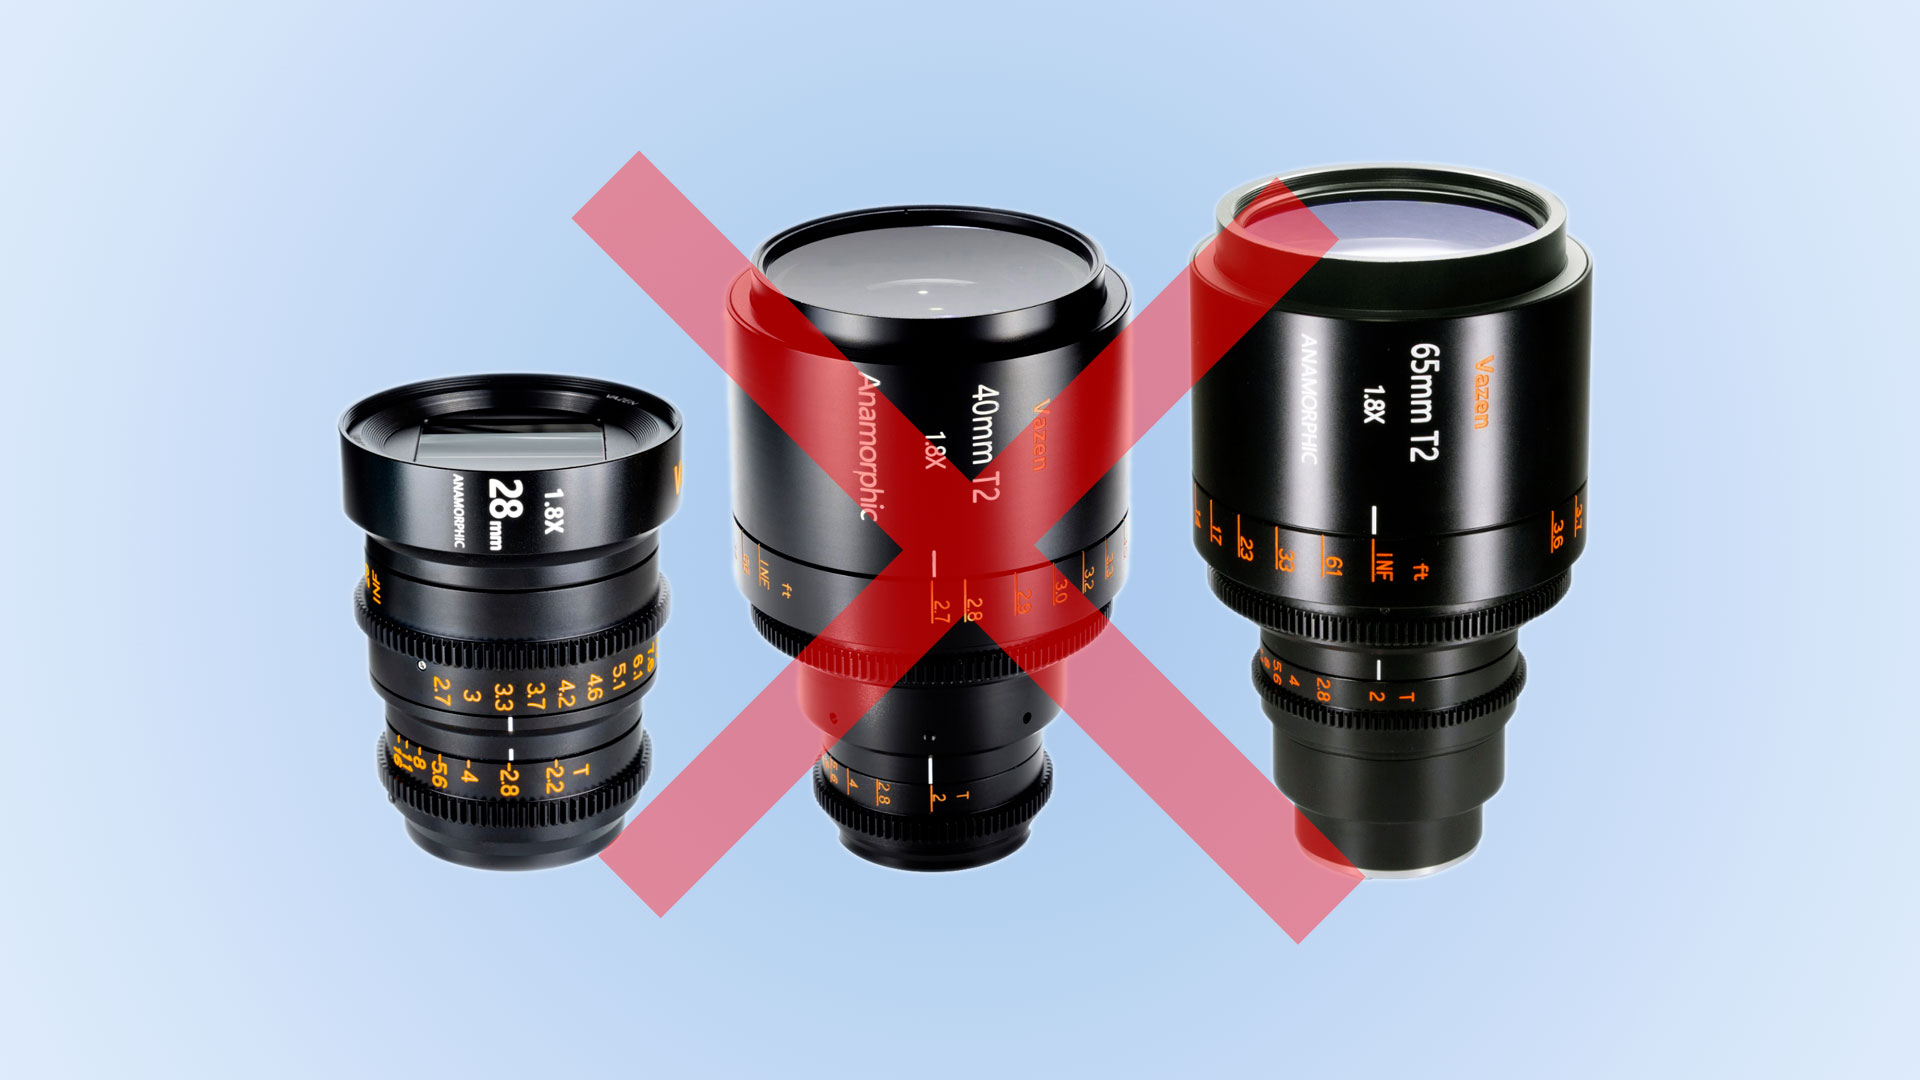 Vazen Lens Manufacturer Officially Ceases Operations | CineD